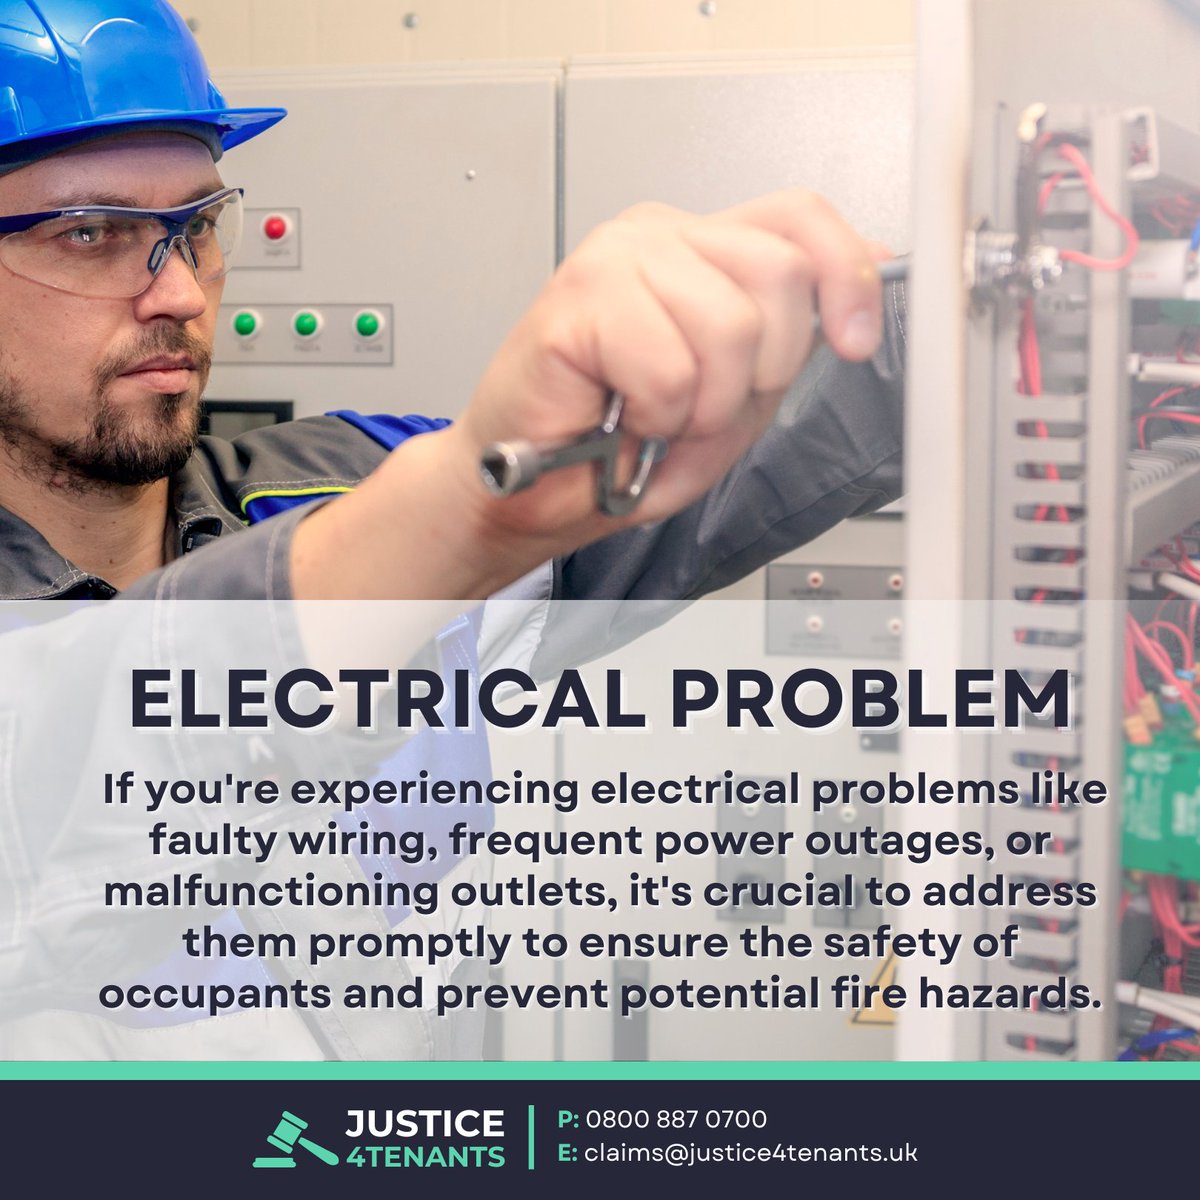 Electrical issues can be more than just an inconvenience; they pose serious safety risks. 

Connect with Justice4Tenants for expert help in ensuring your space is safe and secure. Your safety is our priority! 

#justice4tenants #housingdisrepair #TenantRights #ElectricalSafety